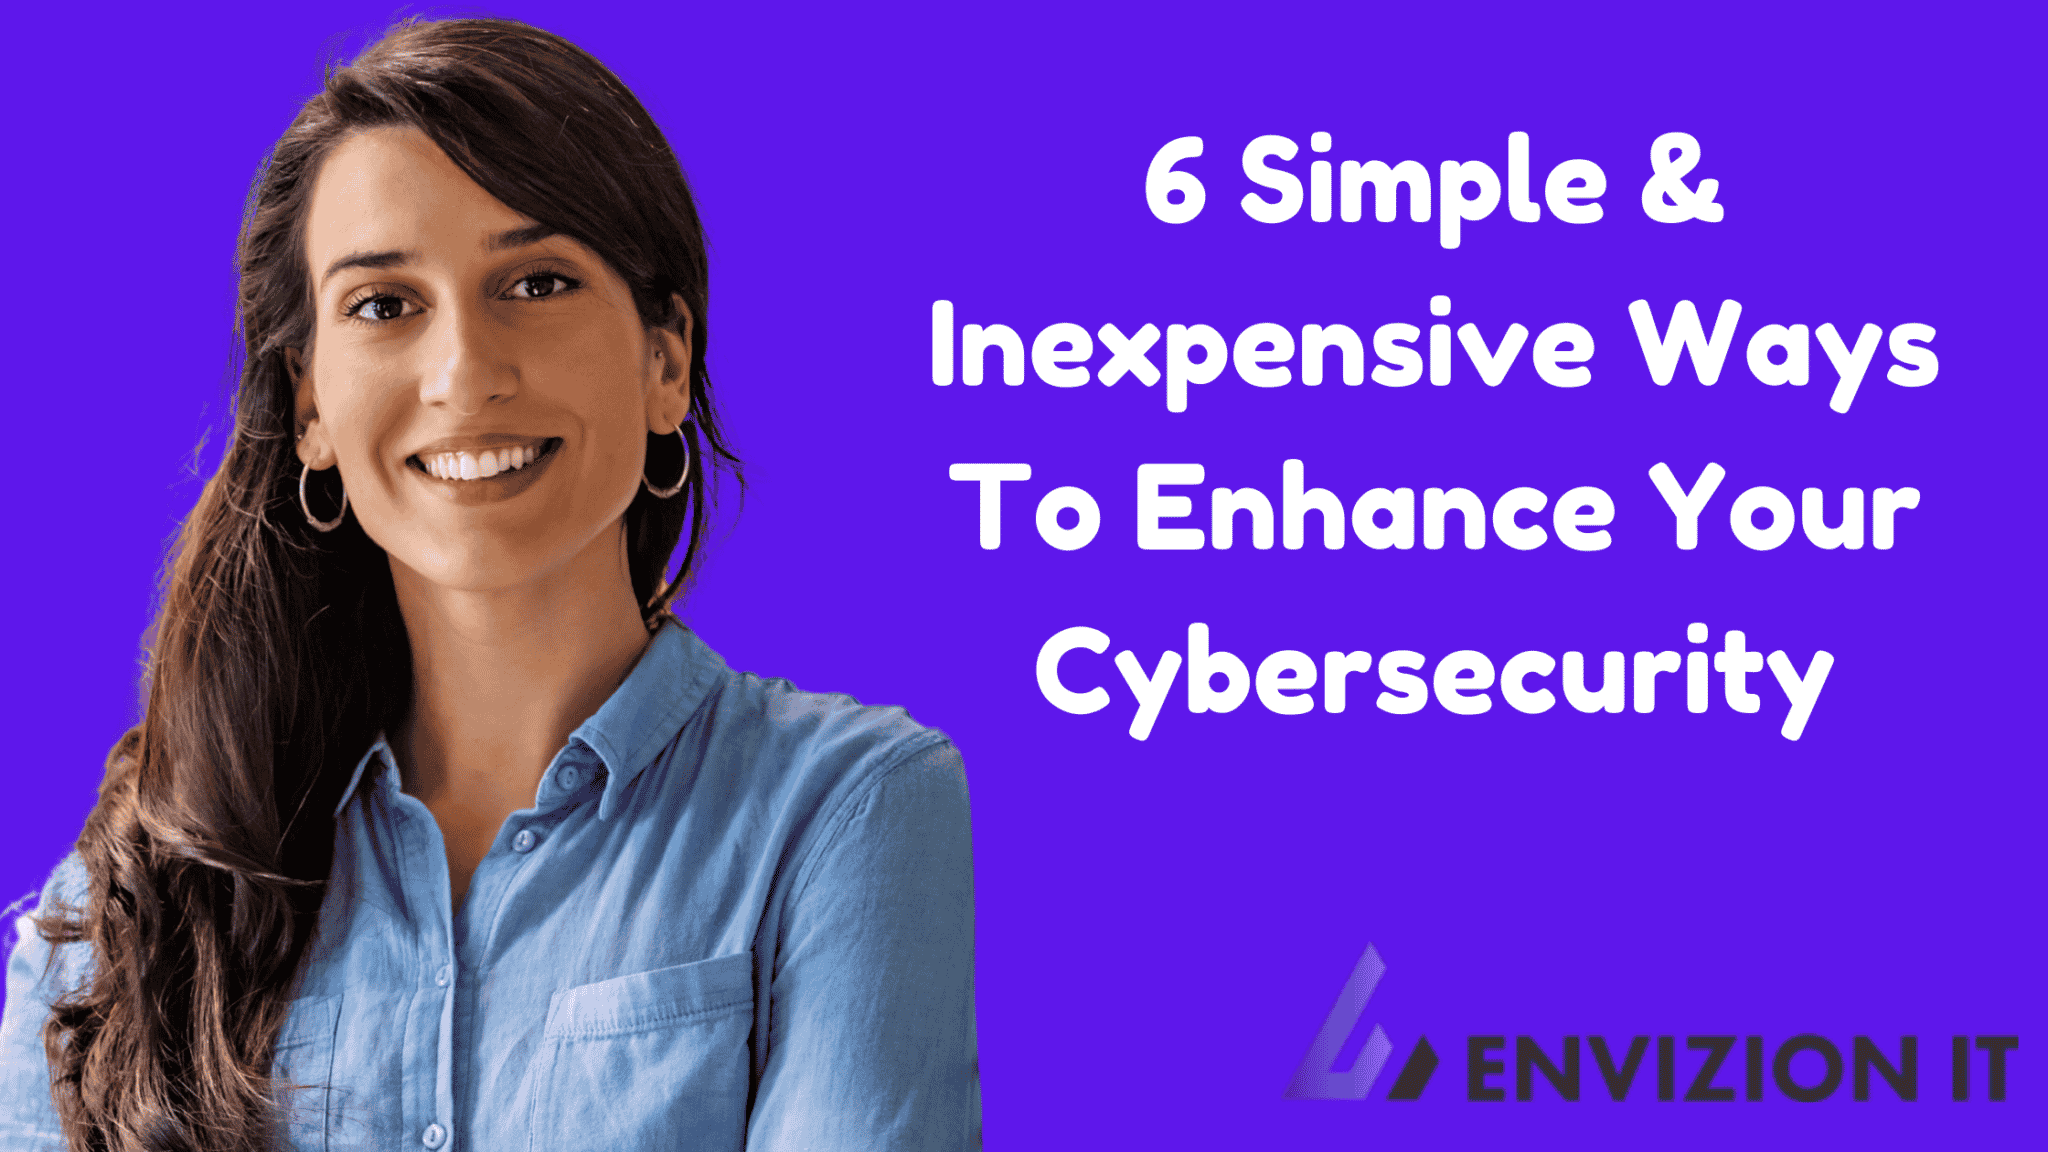 6 Simple & Inexpensive Ways To Enhance Your Cybersecurity